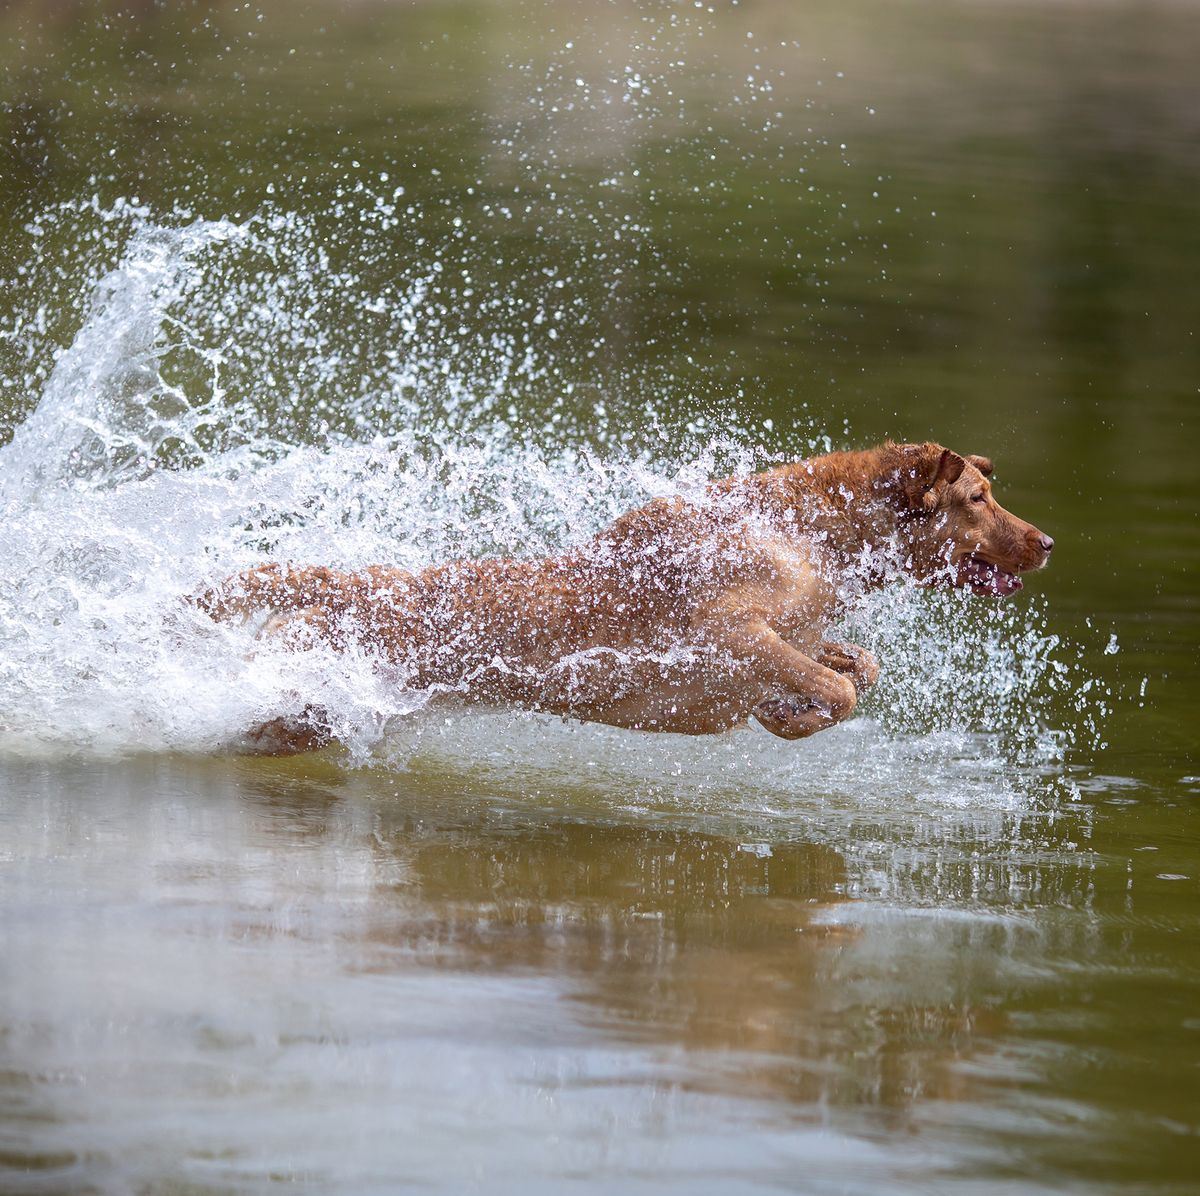 7 Water Dogs — Dogs That Like Water And Swimmng